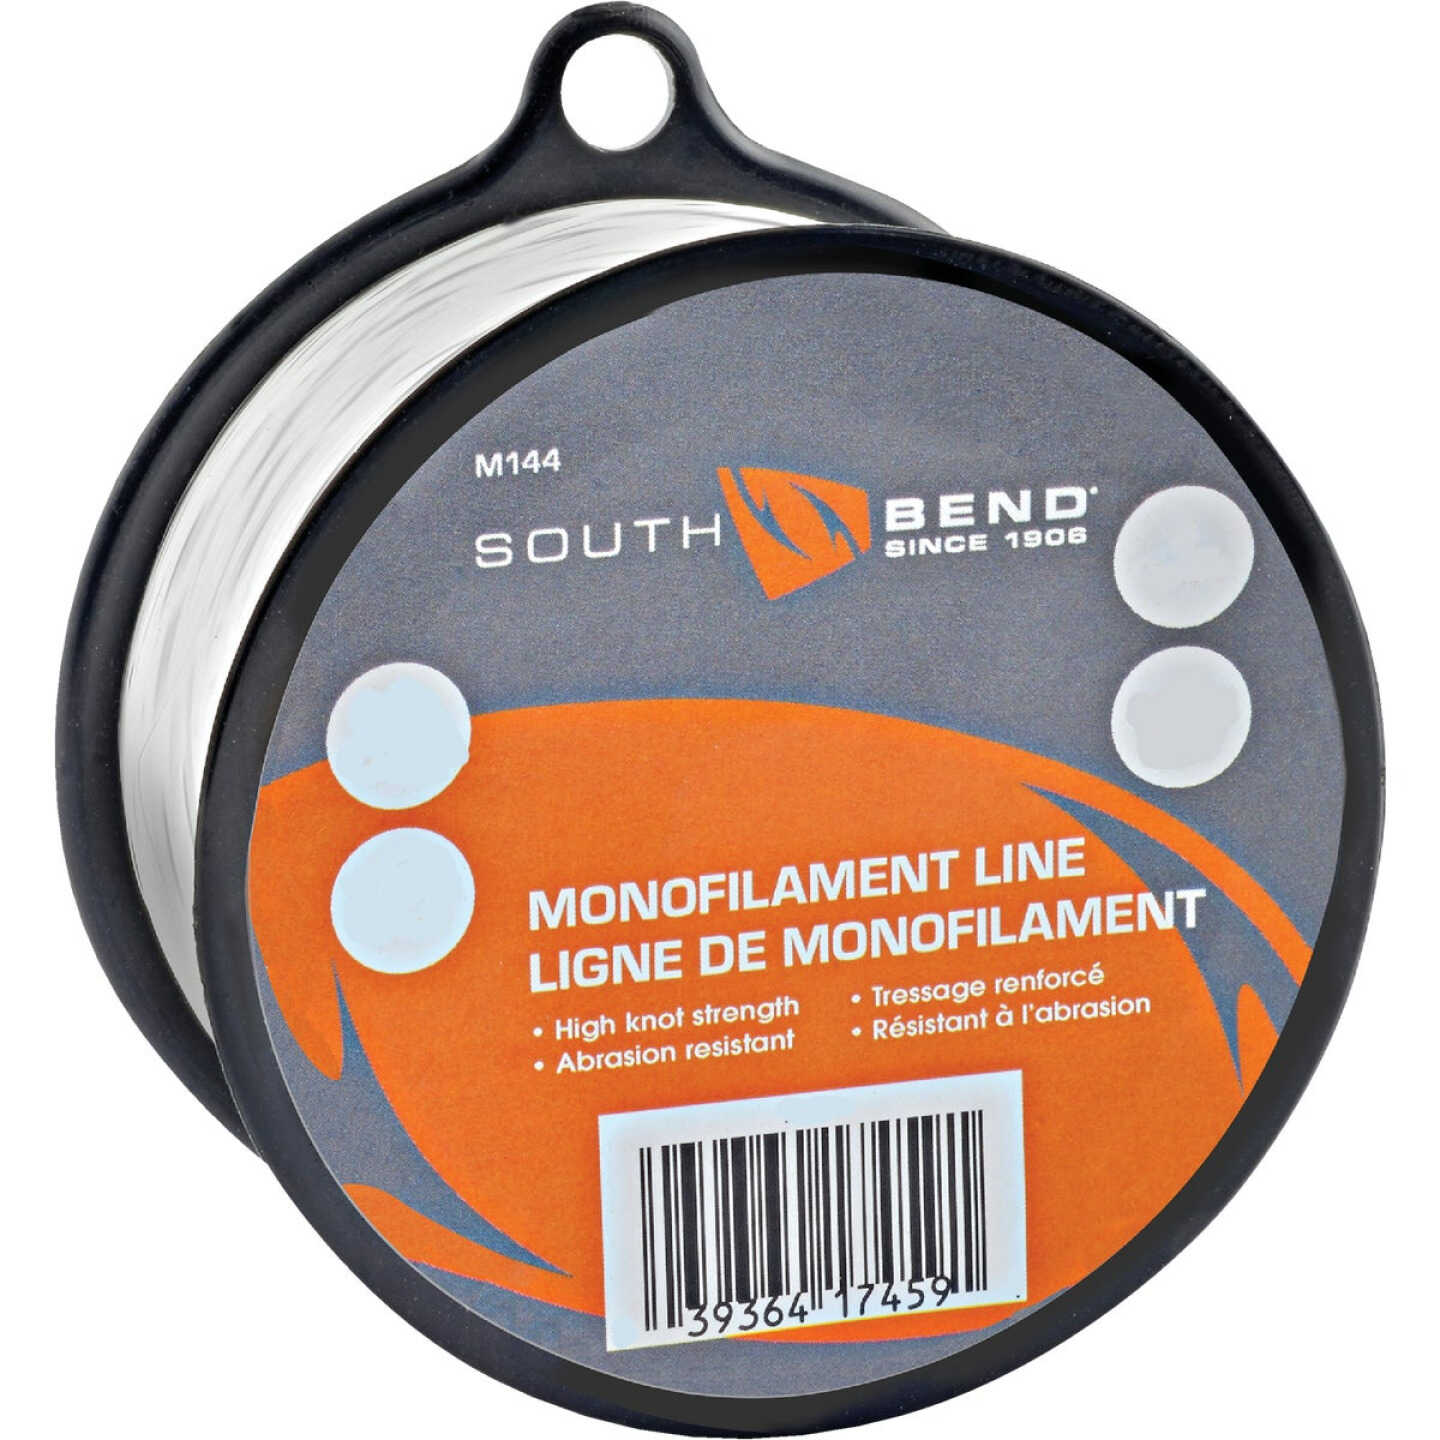 SouthBend 8 Lb. 765 Yd. Clear Monofilament Fishing Line - Northwest  Hardware Stores